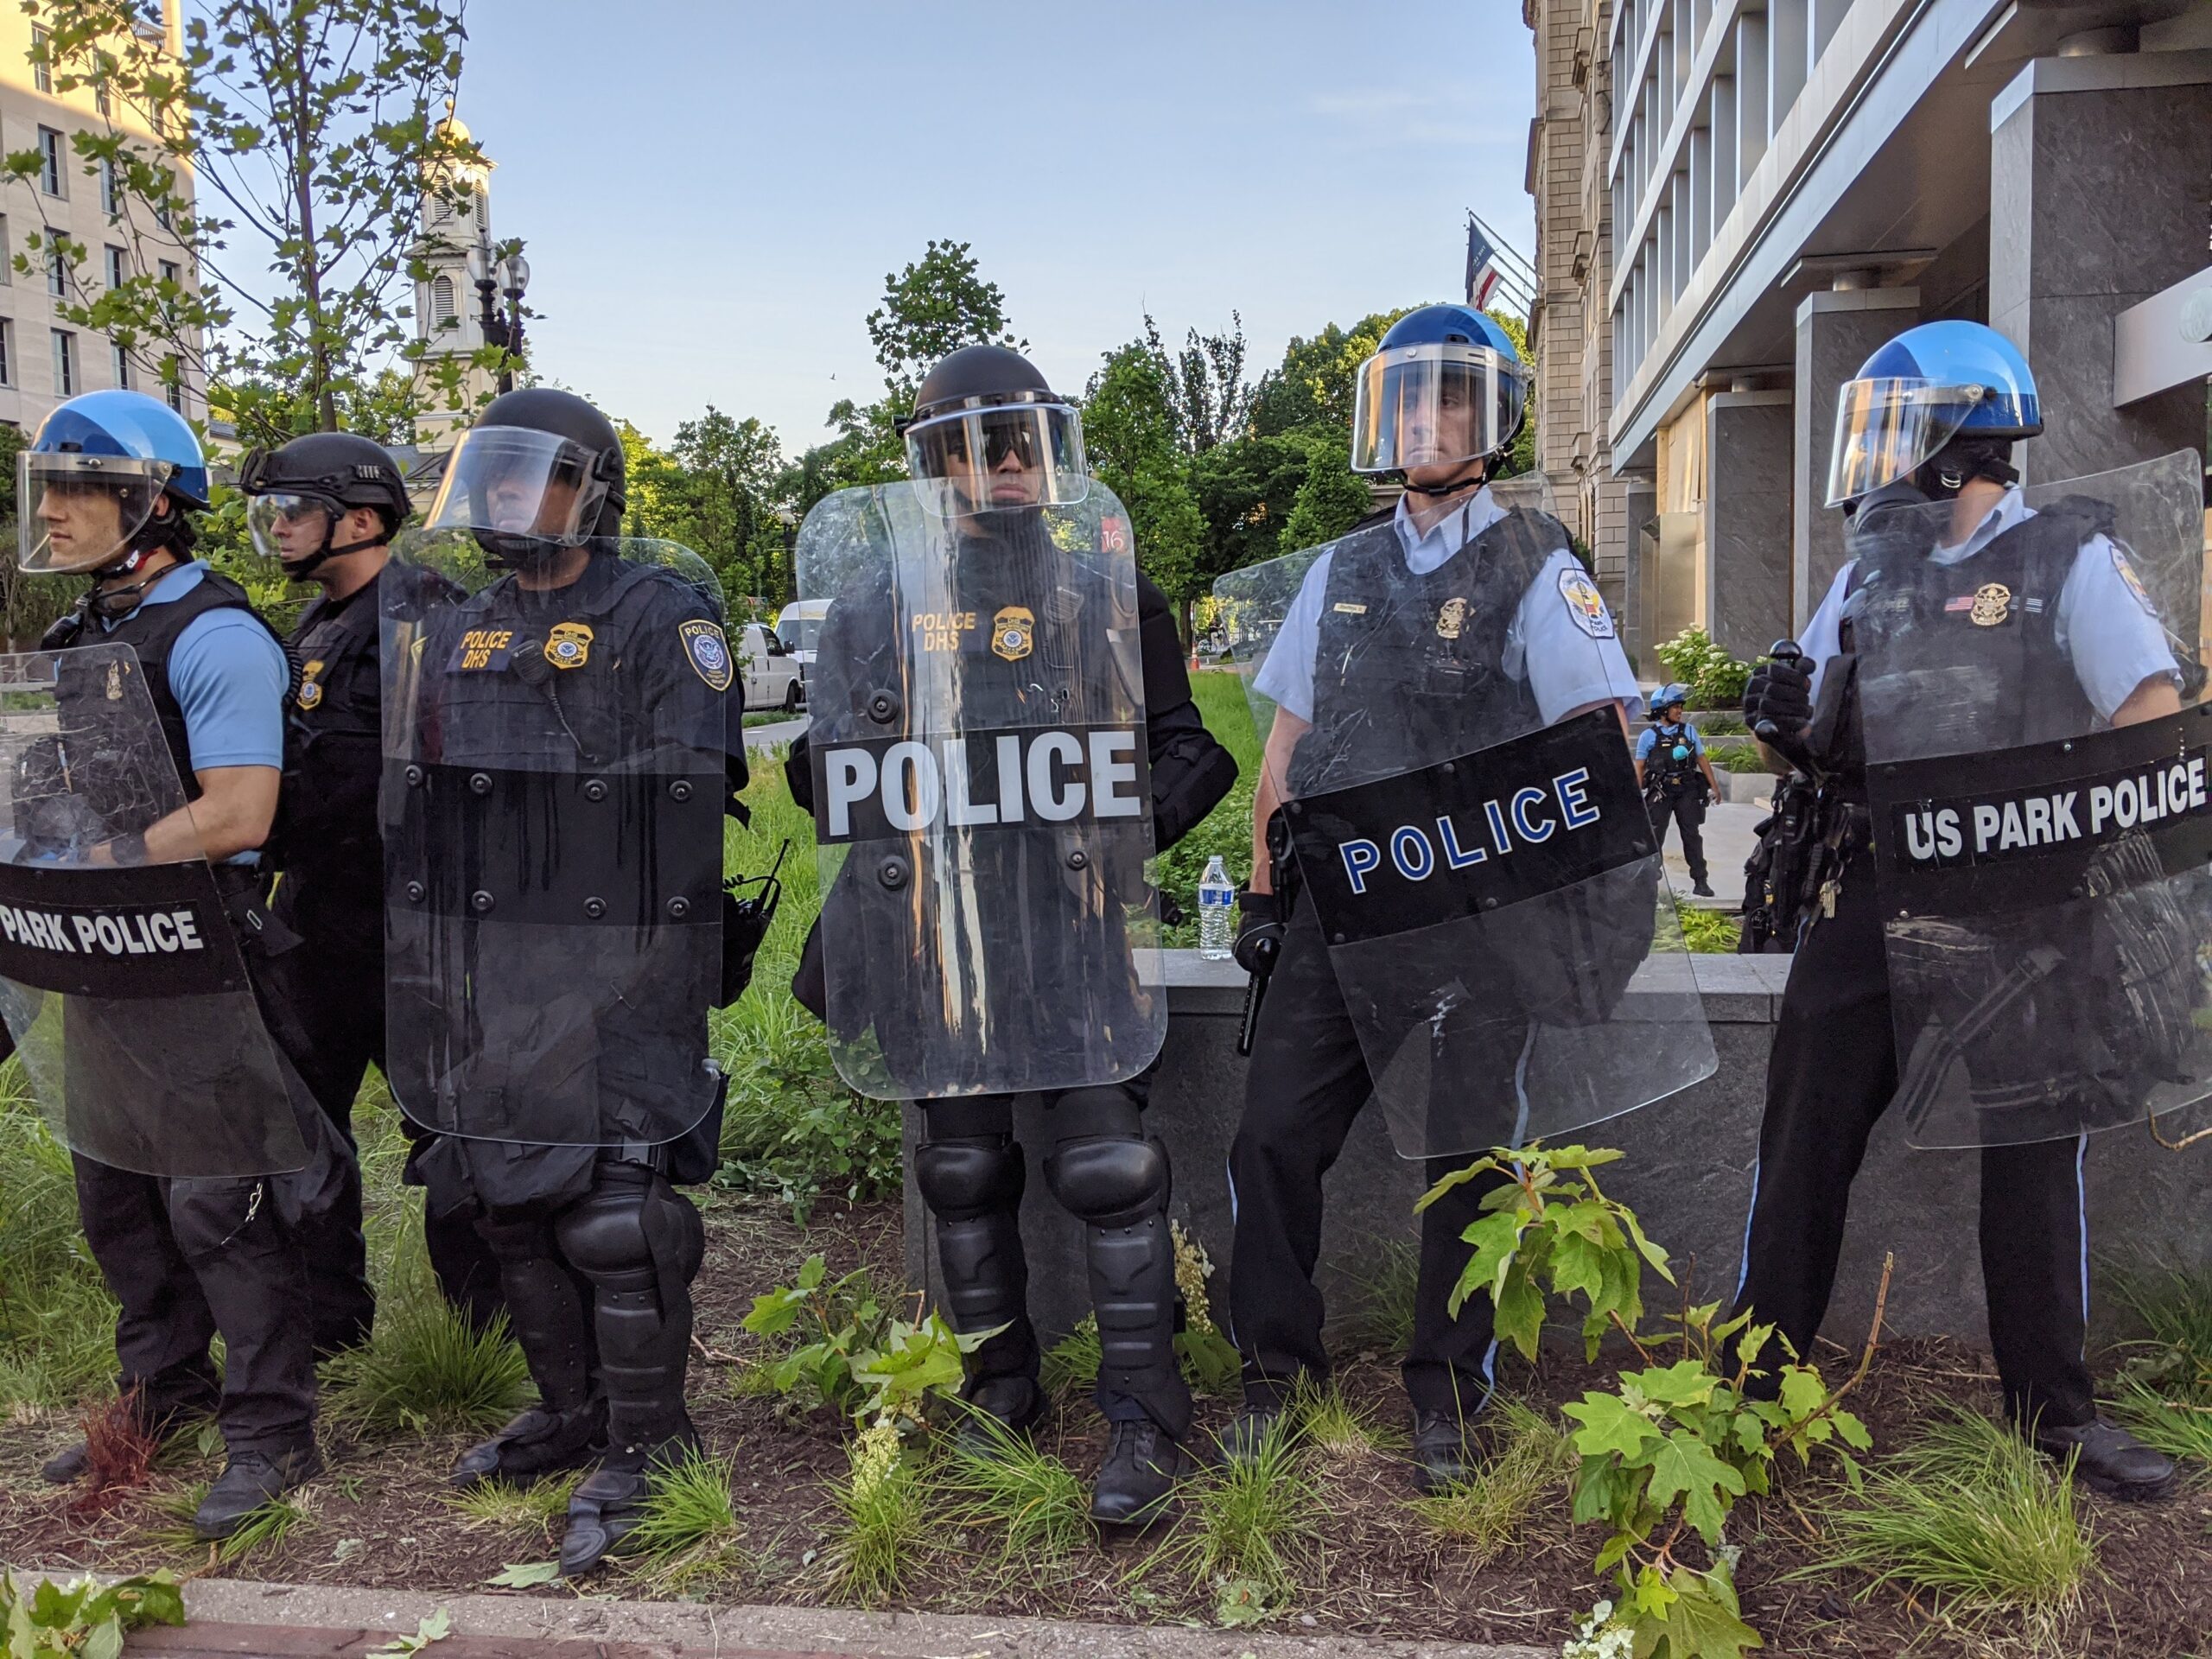 Photo of police lined up in riot gear